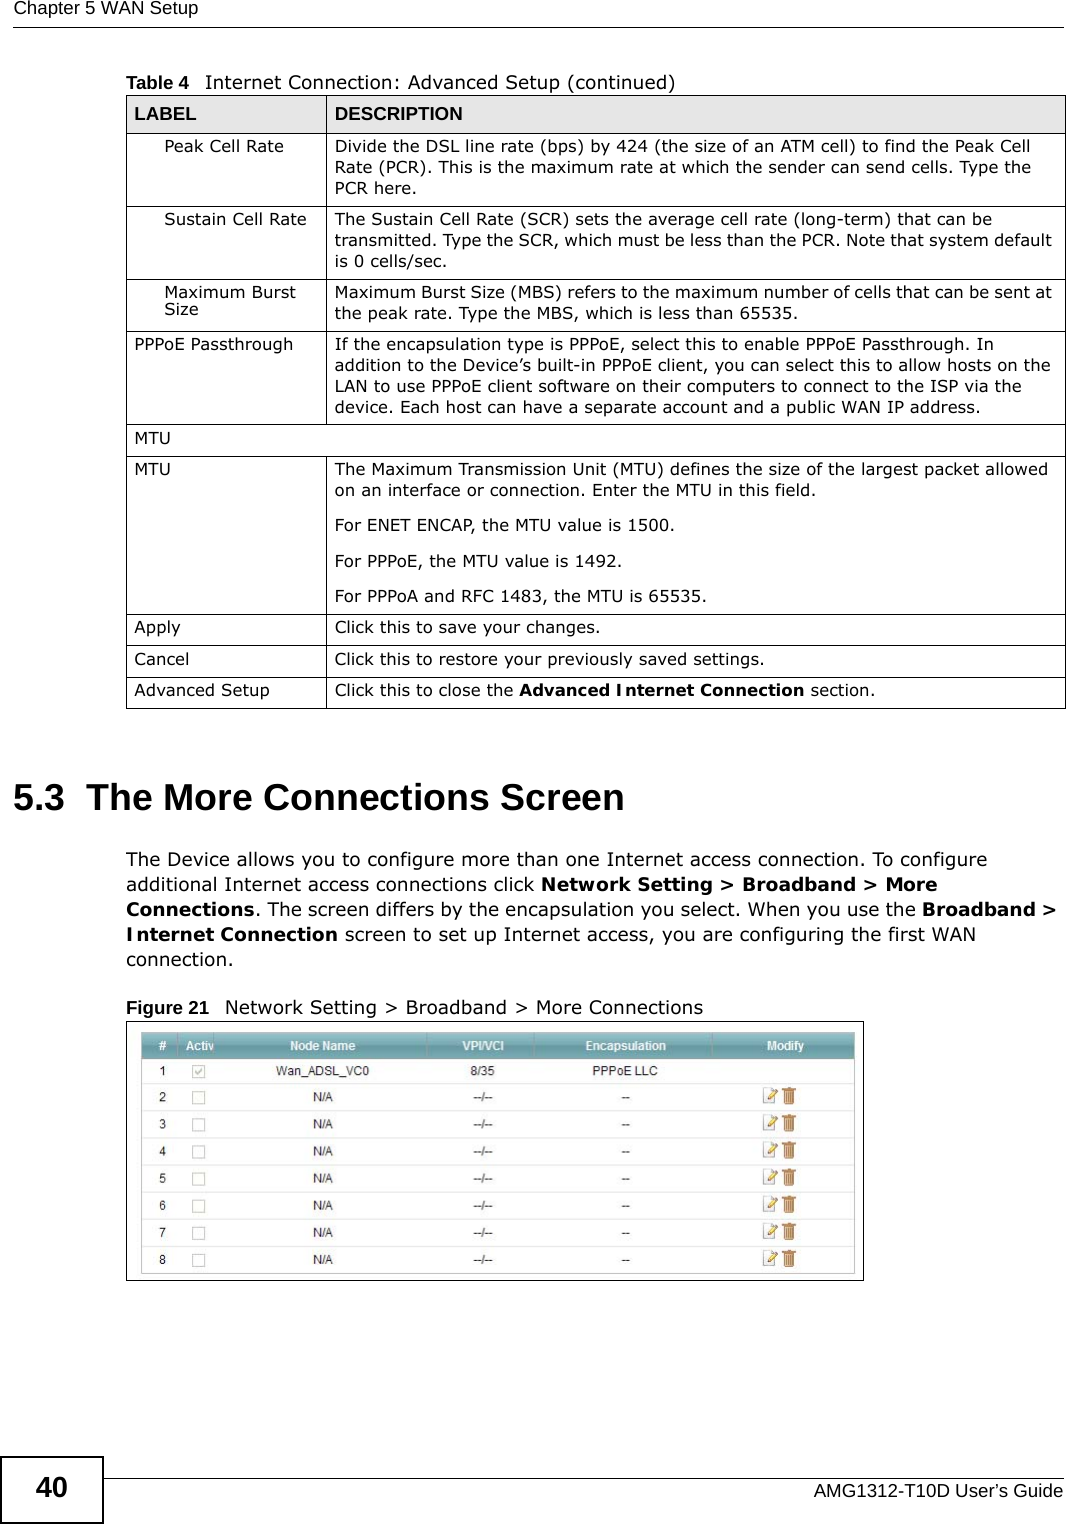 Chapter 5 WAN SetupAMG1312-T10D User’s Guide405.3  The More Connections ScreenThe Device allows you to configure more than one Internet access connection. To configure additional Internet access connections click Network Setting &gt; Broadband &gt; More Connections. The screen differs by the encapsulation you select. When you use the Broadband &gt; Internet Connection screen to set up Internet access, you are configuring the first WAN connection. Figure 21   Network Setting &gt; Broadband &gt; More ConnectionsPeak Cell Rate Divide the DSL line rate (bps) by 424 (the size of an ATM cell) to find the Peak Cell Rate (PCR). This is the maximum rate at which the sender can send cells. Type the PCR here.Sustain Cell Rate The Sustain Cell Rate (SCR) sets the average cell rate (long-term) that can be transmitted. Type the SCR, which must be less than the PCR. Note that system default is 0 cells/sec. Maximum Burst Size Maximum Burst Size (MBS) refers to the maximum number of cells that can be sent at the peak rate. Type the MBS, which is less than 65535. PPPoE Passthrough If the encapsulation type is PPPoE, select this to enable PPPoE Passthrough. In addition to the Device’s built-in PPPoE client, you can select this to allow hosts on the LAN to use PPPoE client software on their computers to connect to the ISP via the device. Each host can have a separate account and a public WAN IP address.MTUMTU The Maximum Transmission Unit (MTU) defines the size of the largest packet allowed on an interface or connection. Enter the MTU in this field.For ENET ENCAP, the MTU value is 1500.For PPPoE, the MTU value is 1492.For PPPoA and RFC 1483, the MTU is 65535.Apply Click this to save your changes. Cancel Click this to restore your previously saved settings.Advanced Setup Click this to close the Advanced Internet Connection section.Table 4   Internet Connection: Advanced Setup (continued)LABEL DESCRIPTION